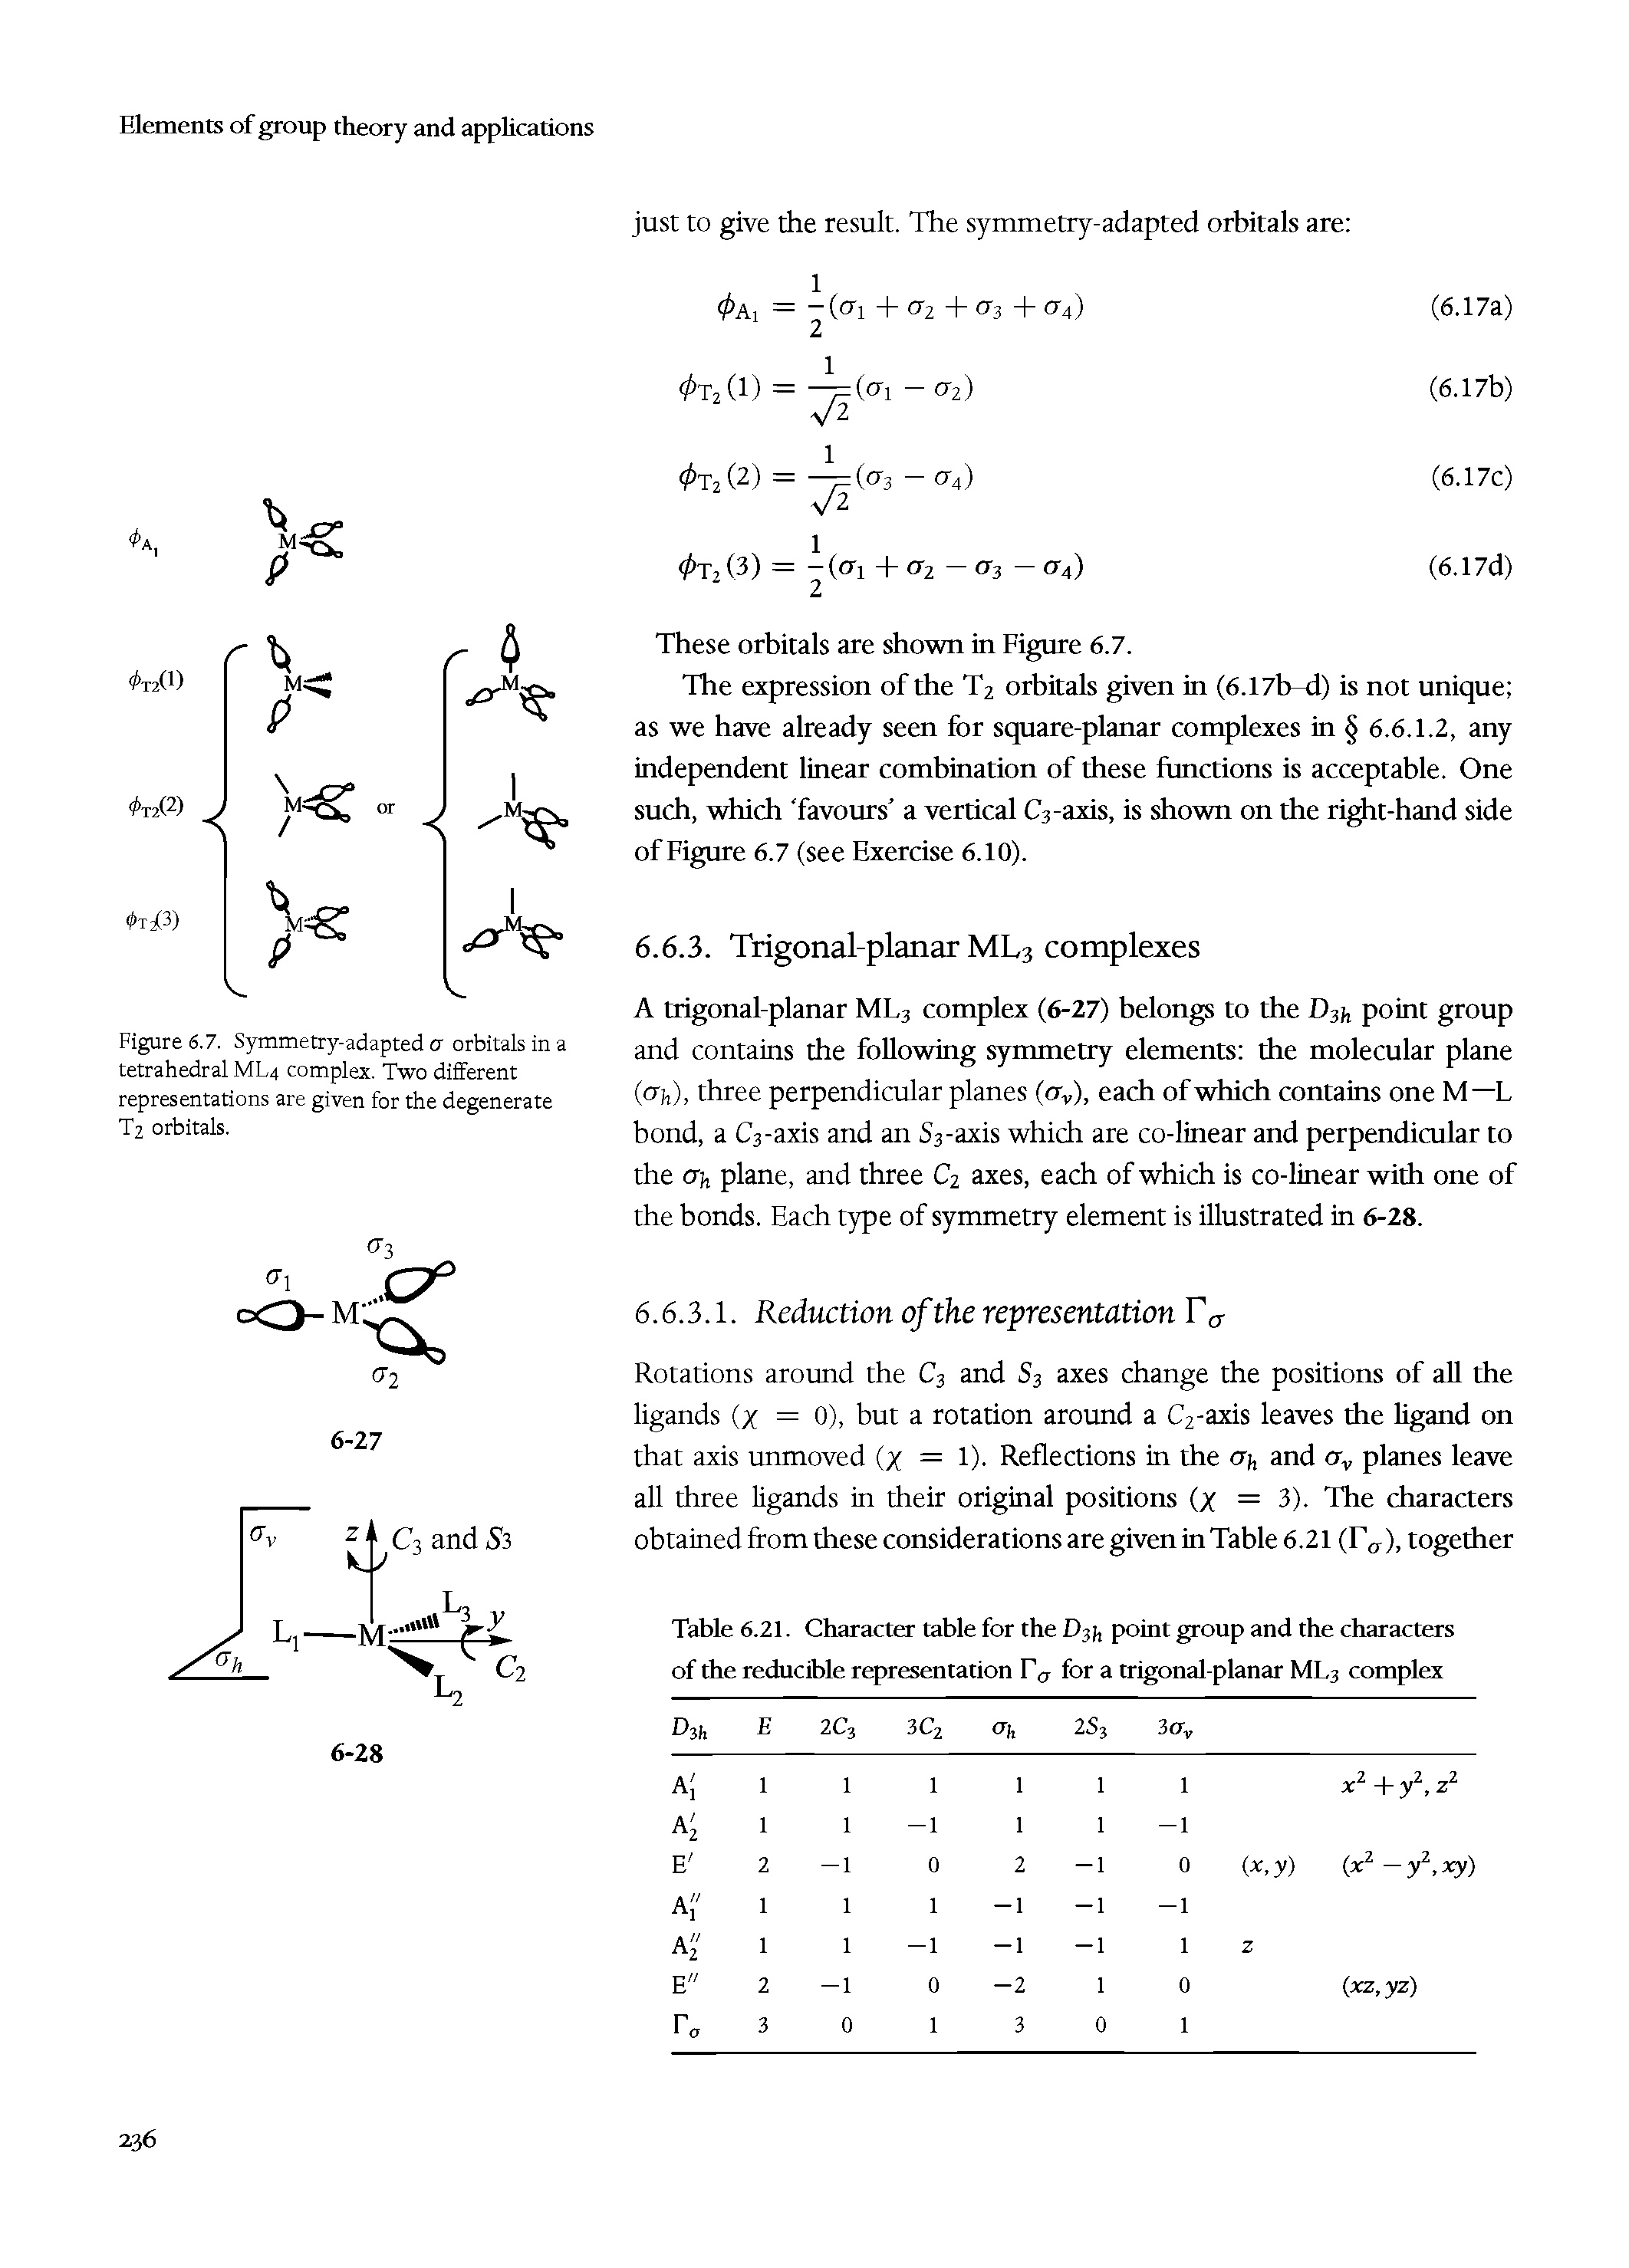 Table 6.21. Character table for the D31, point group and the characters of the reducible representation F, for a trigonal-planar ML3 complex...